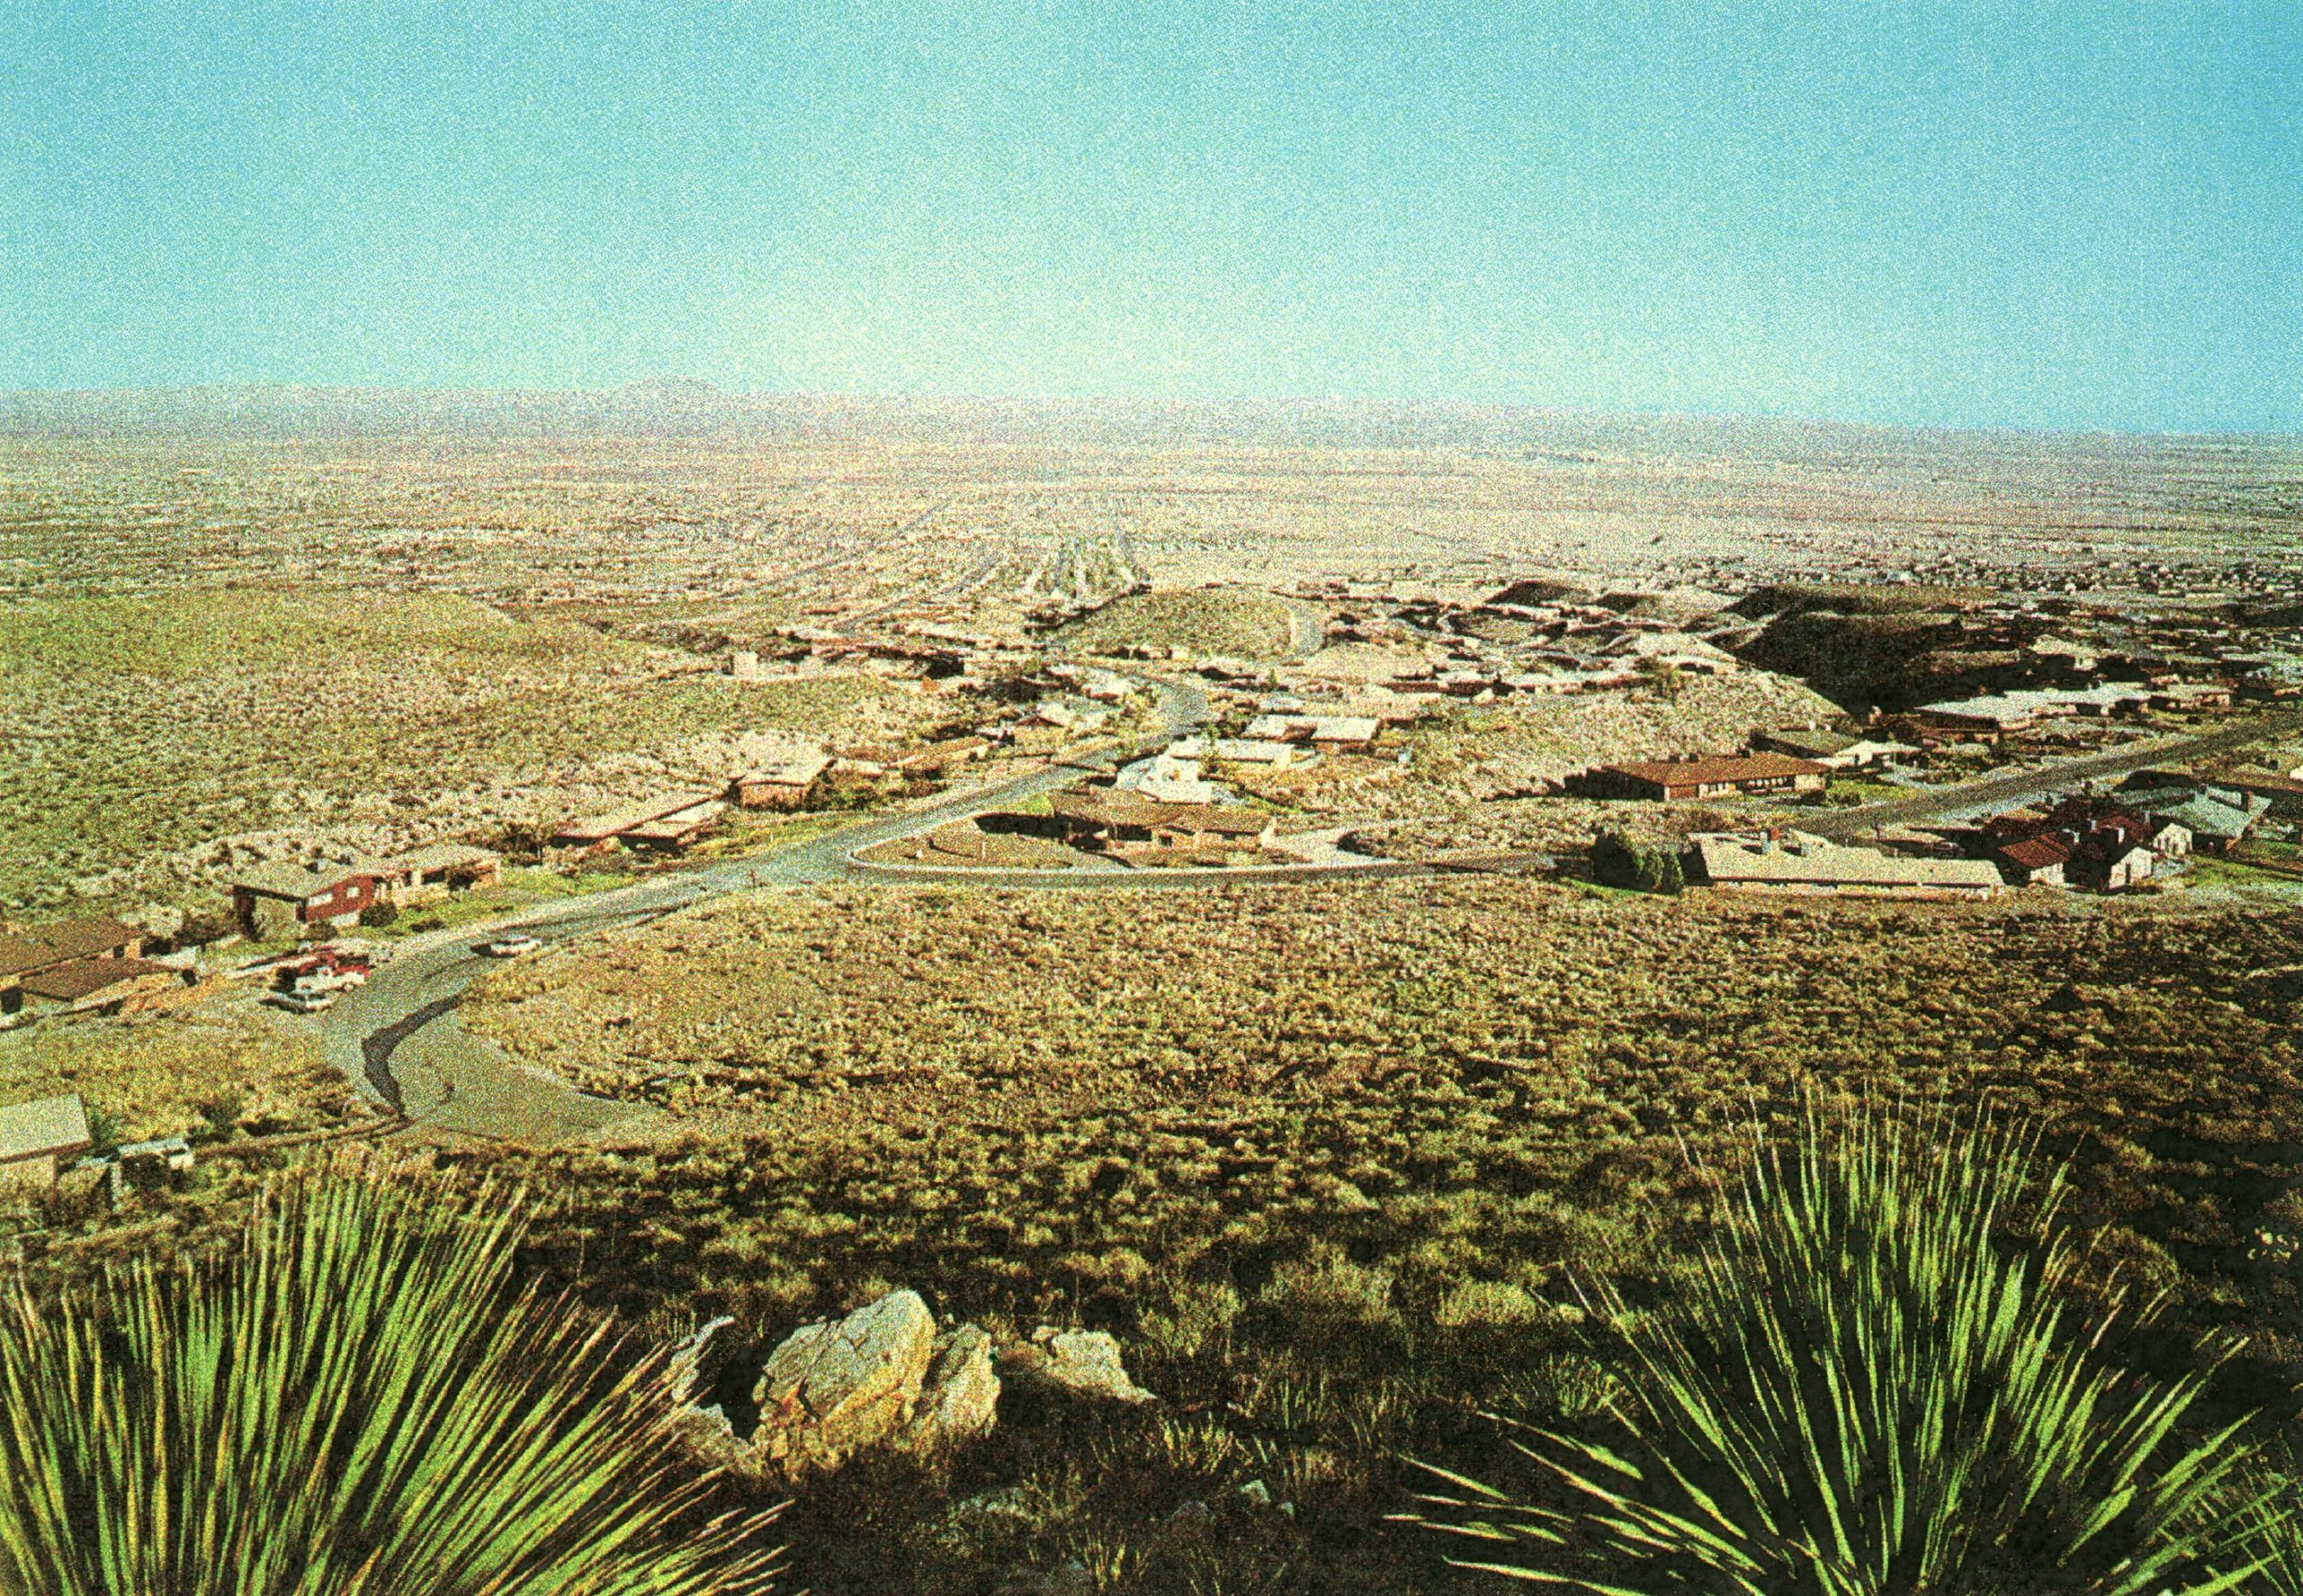 View looking down on Mountain Park and Northeast El Paso in the 60's. Our house is in the upper third middle of the photo seen at the middle bottom of the hill of Devil's Tower.
Photo © Fred K. James  